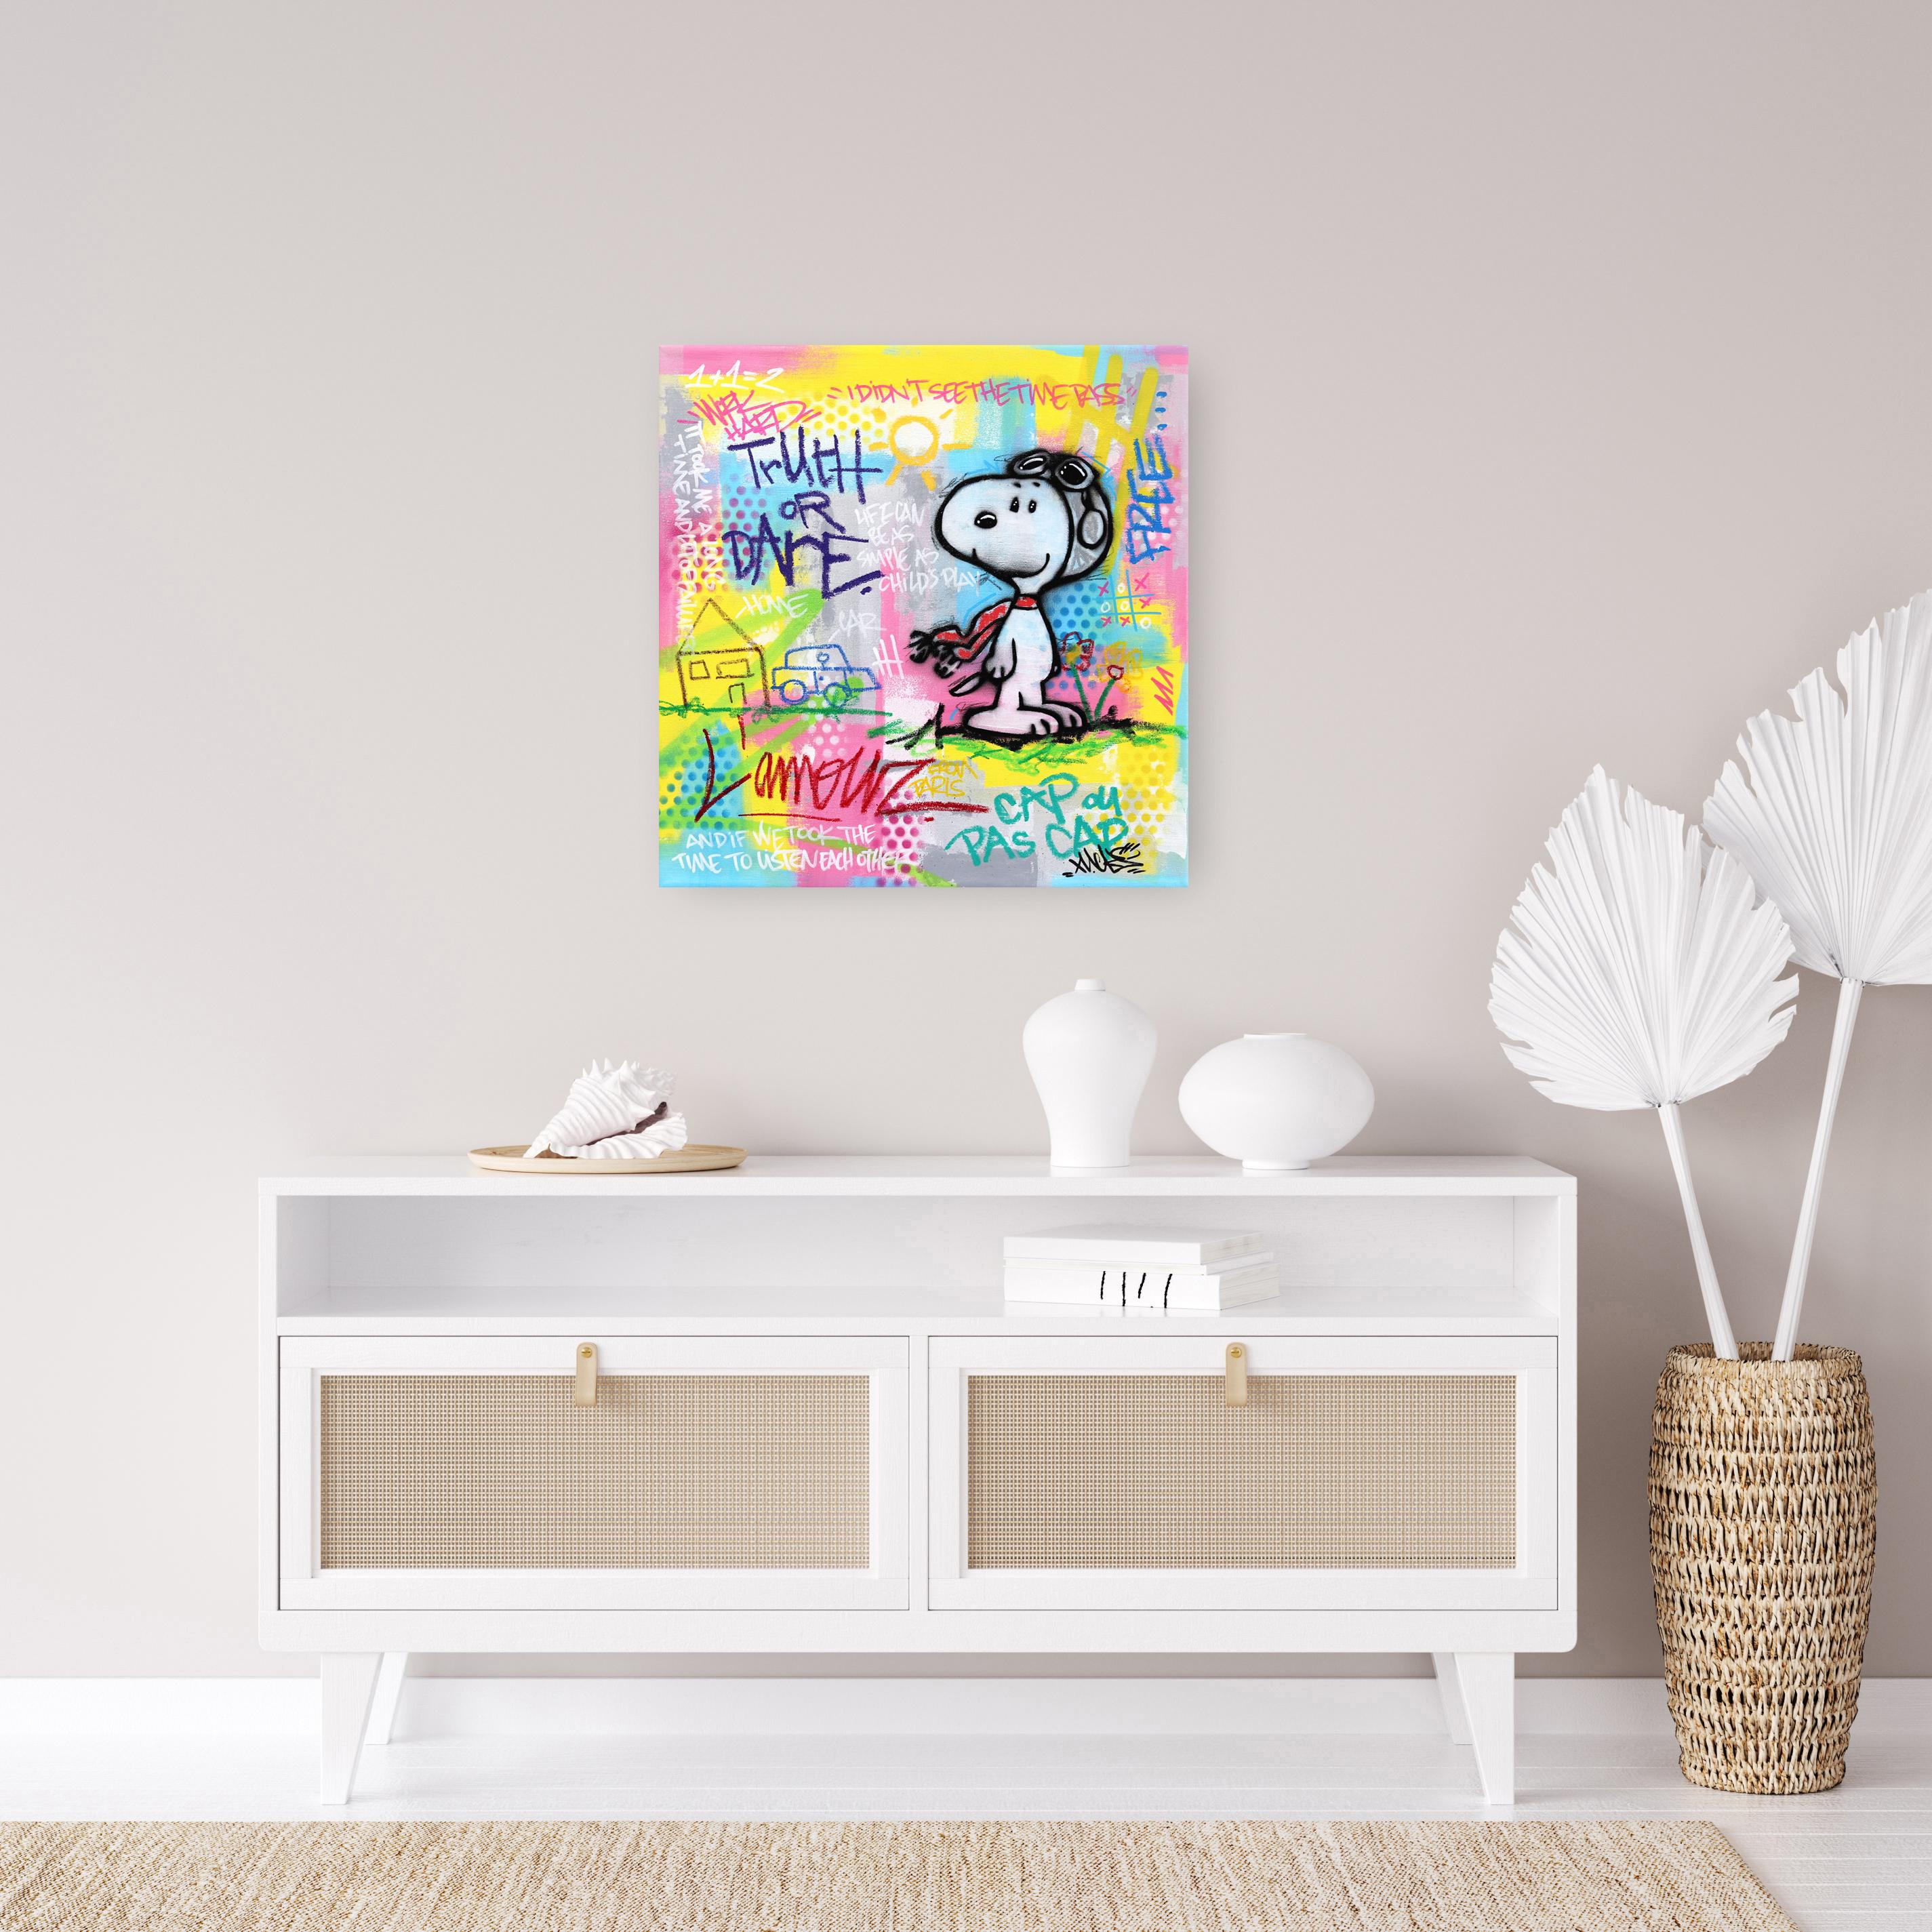 The Aviator  - Original Pop Art Painting with Cartoon and Comic Characters For Sale 3